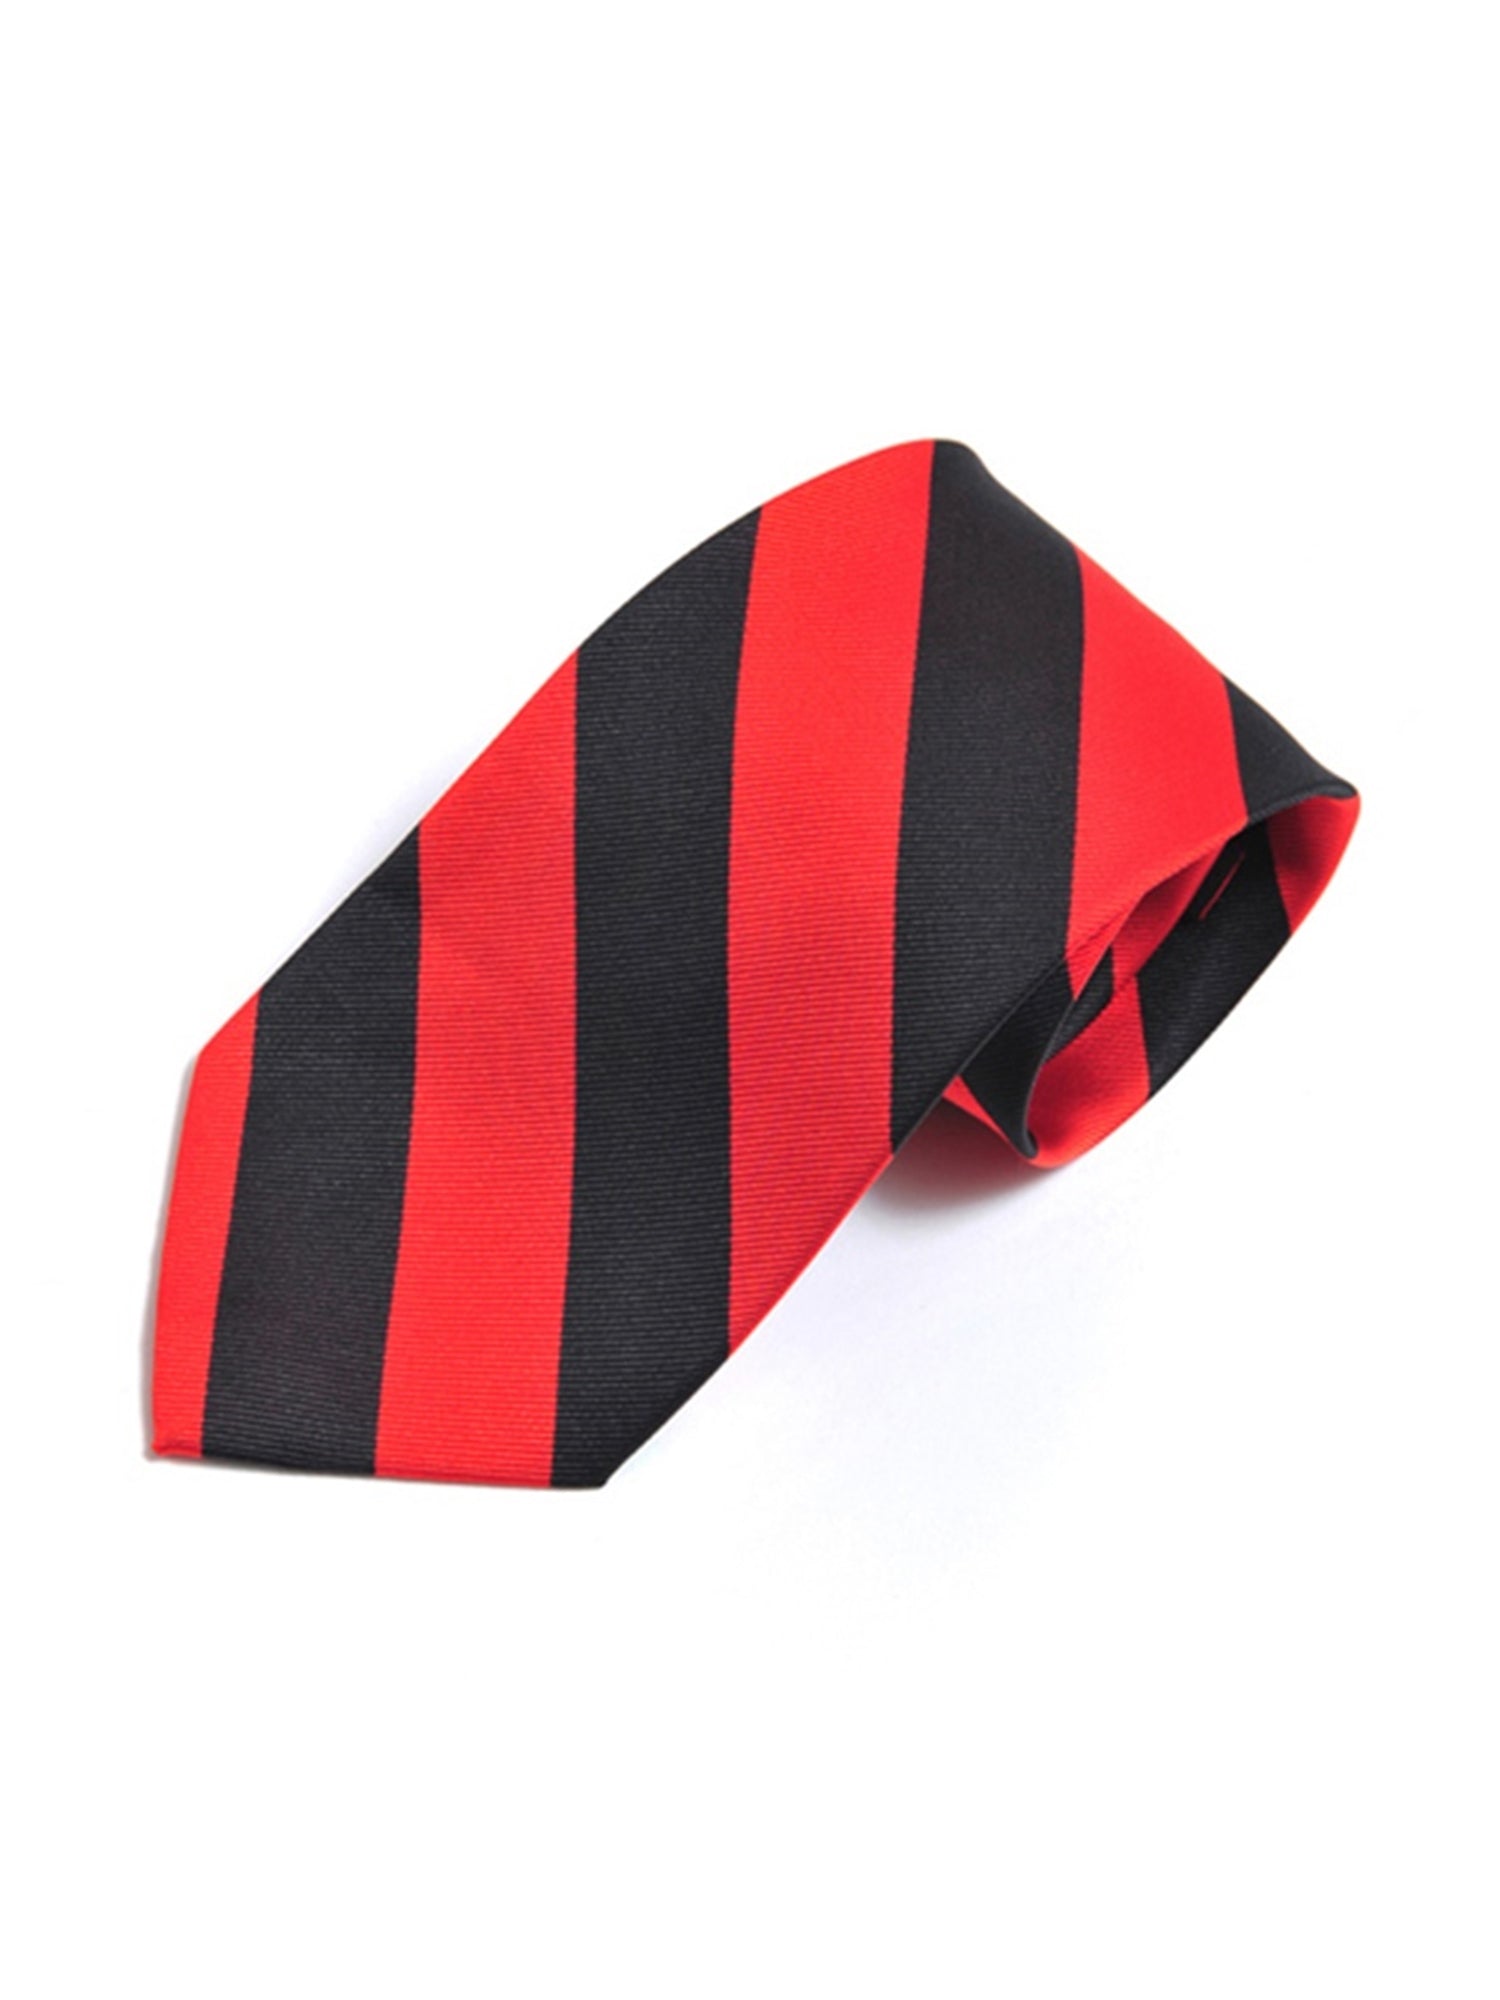 Men's College Striped Colored Silk Long Or X-Long Neck Tie Neck Tie TheDapperTie Red & Black 57" long & 3.25" wide 